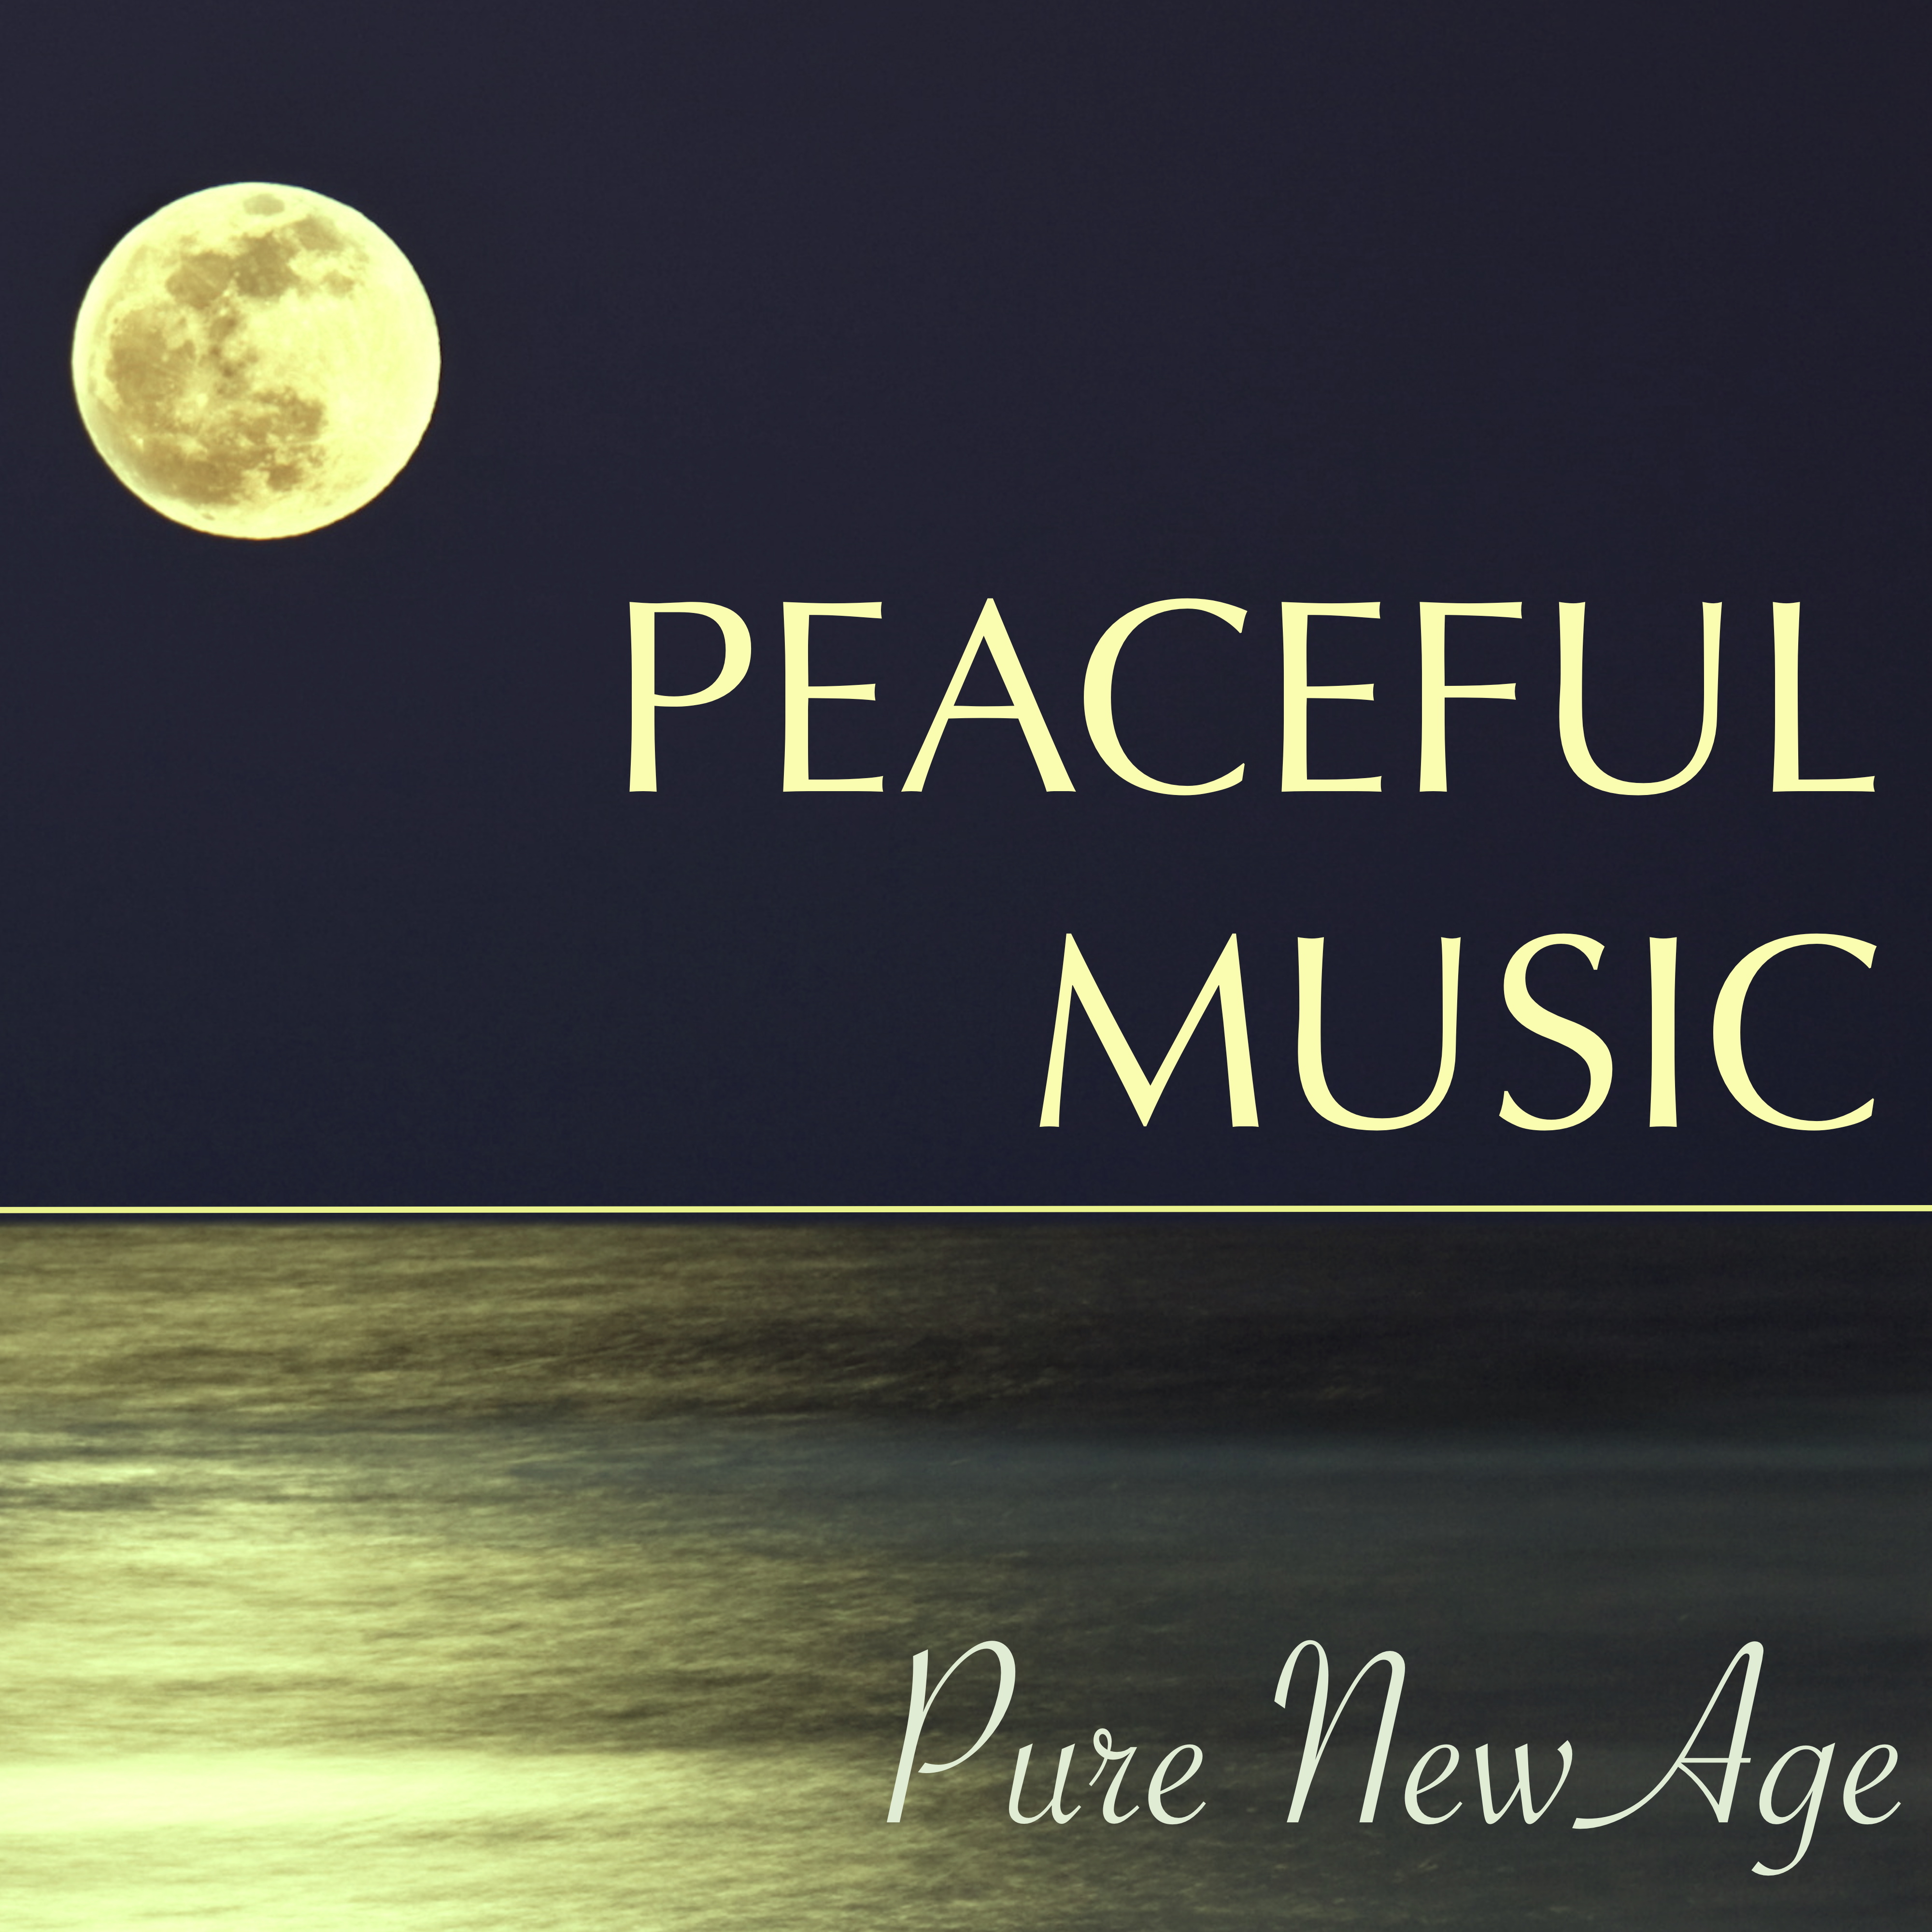 Peaceful Music  Pure New Age Music for Soul Healing, Yoga Class, Relaxation  Meditation